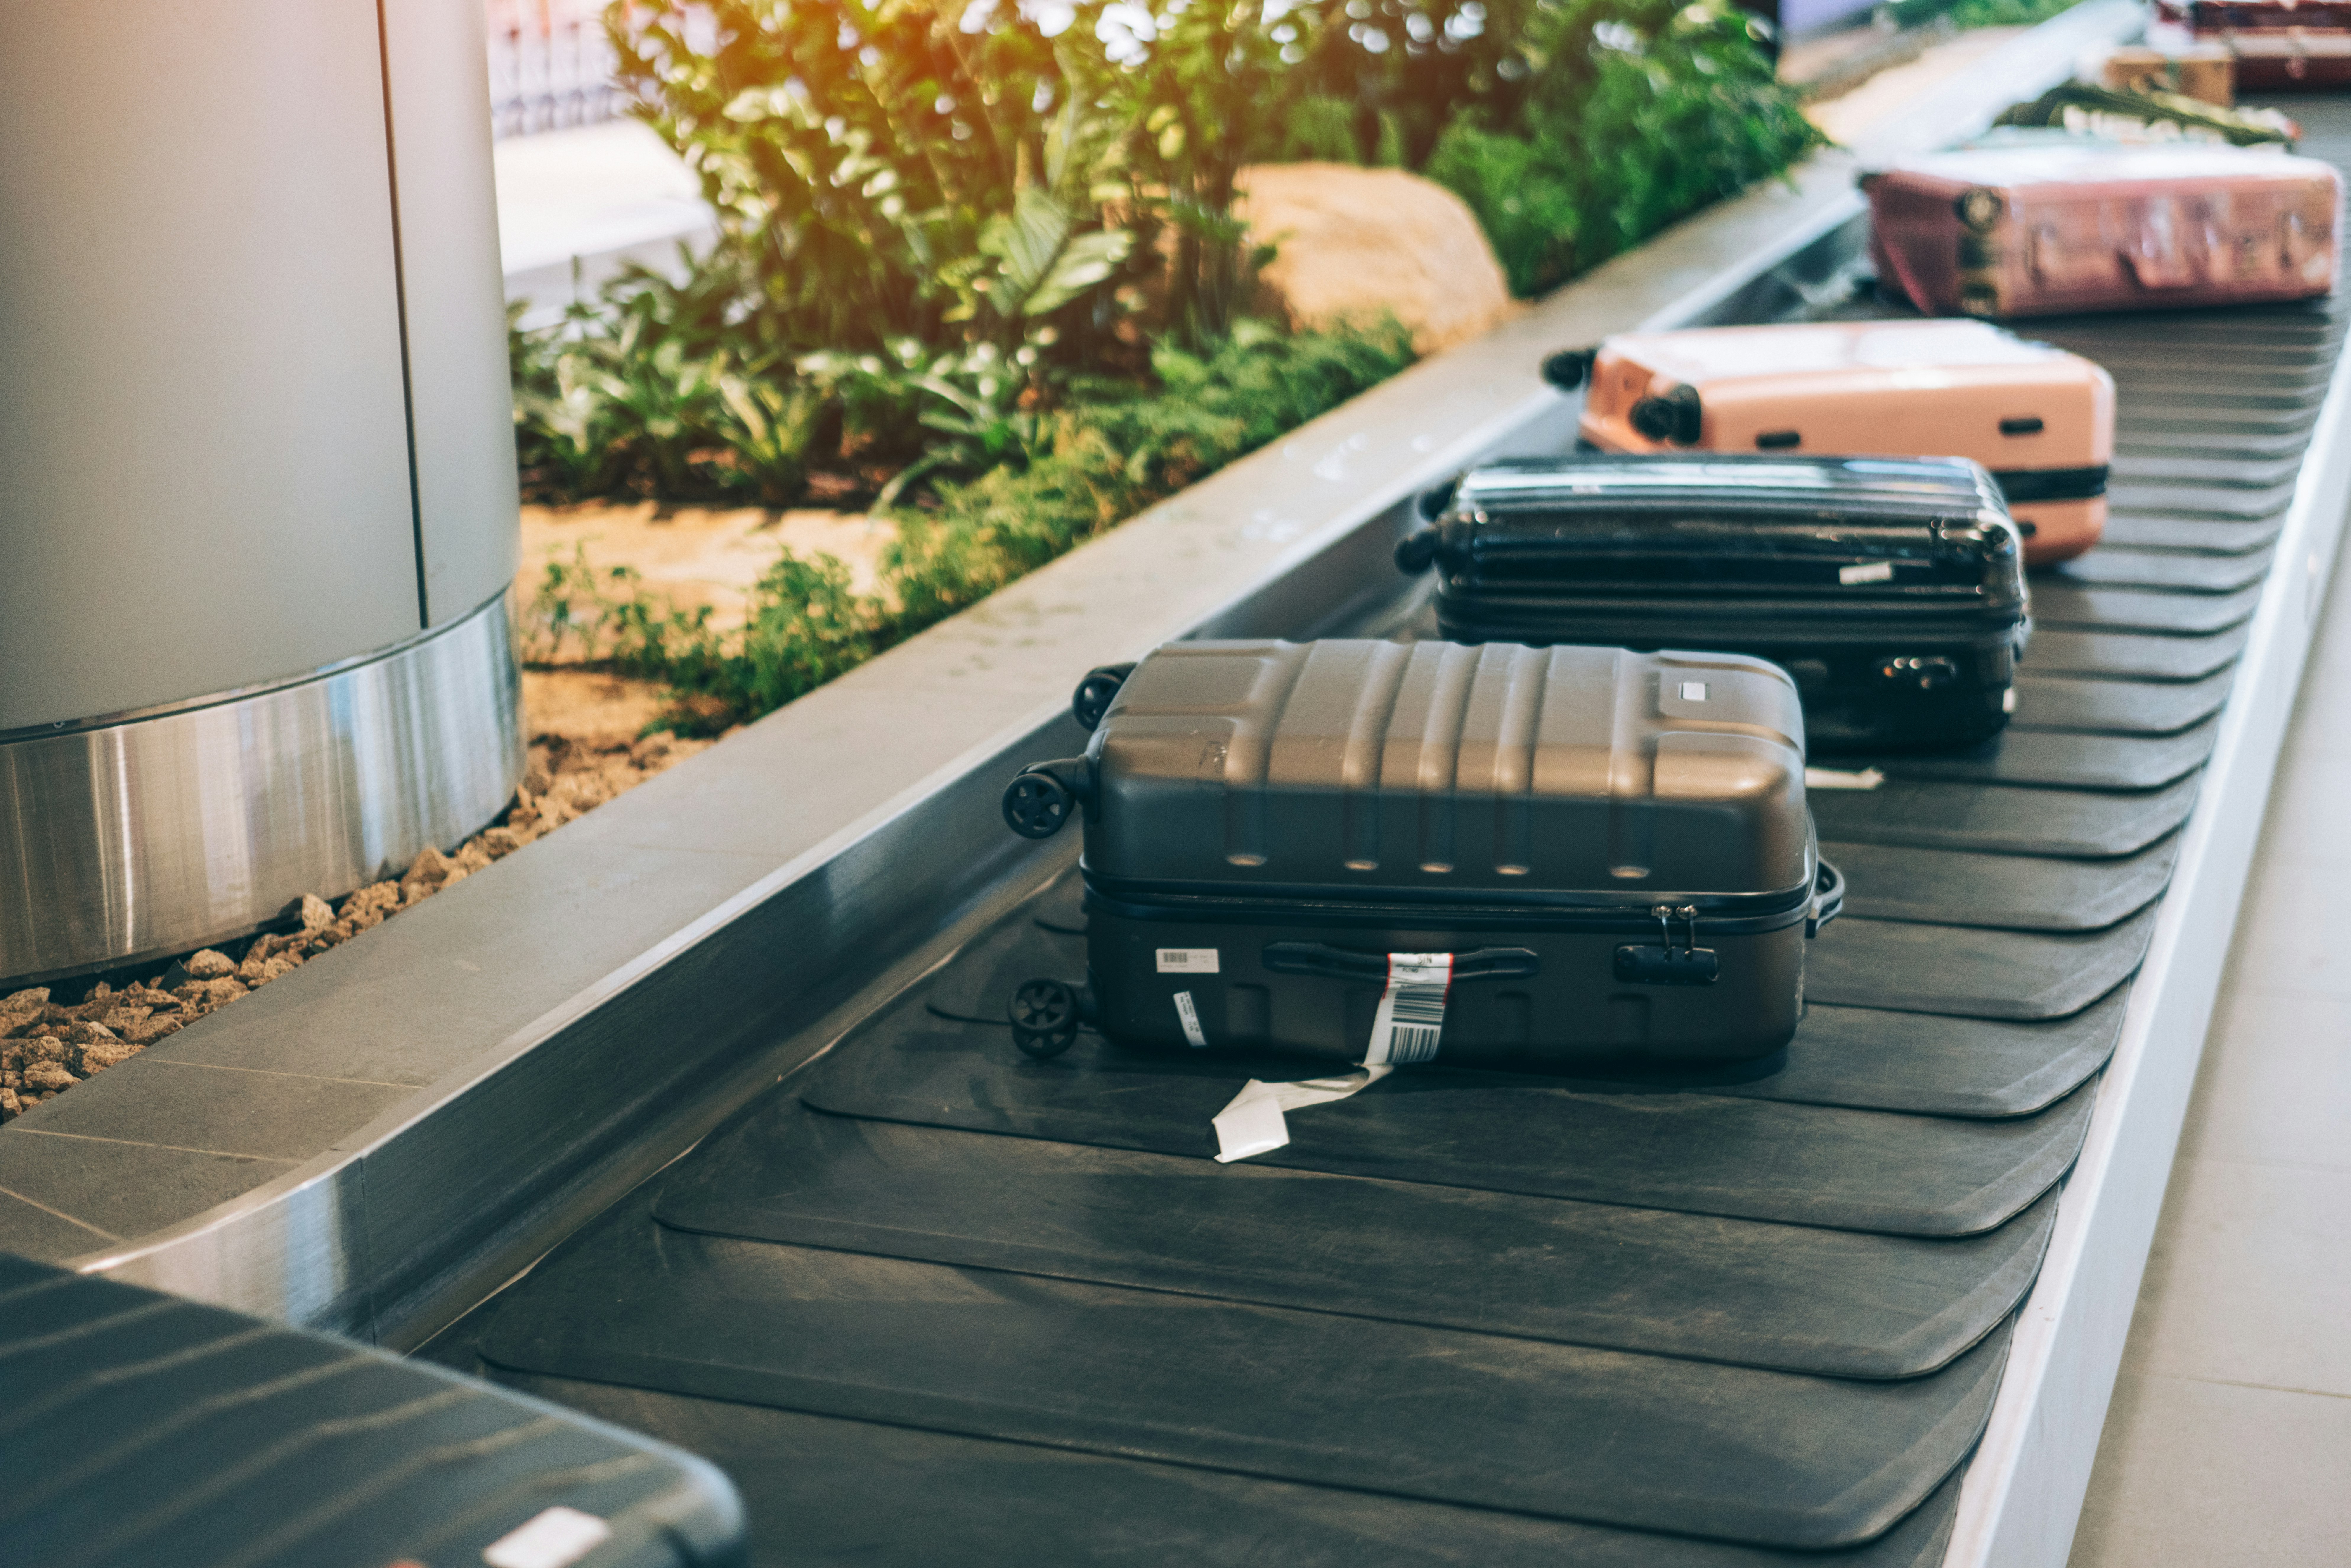 Suitcases on a conveyor belt in an airport